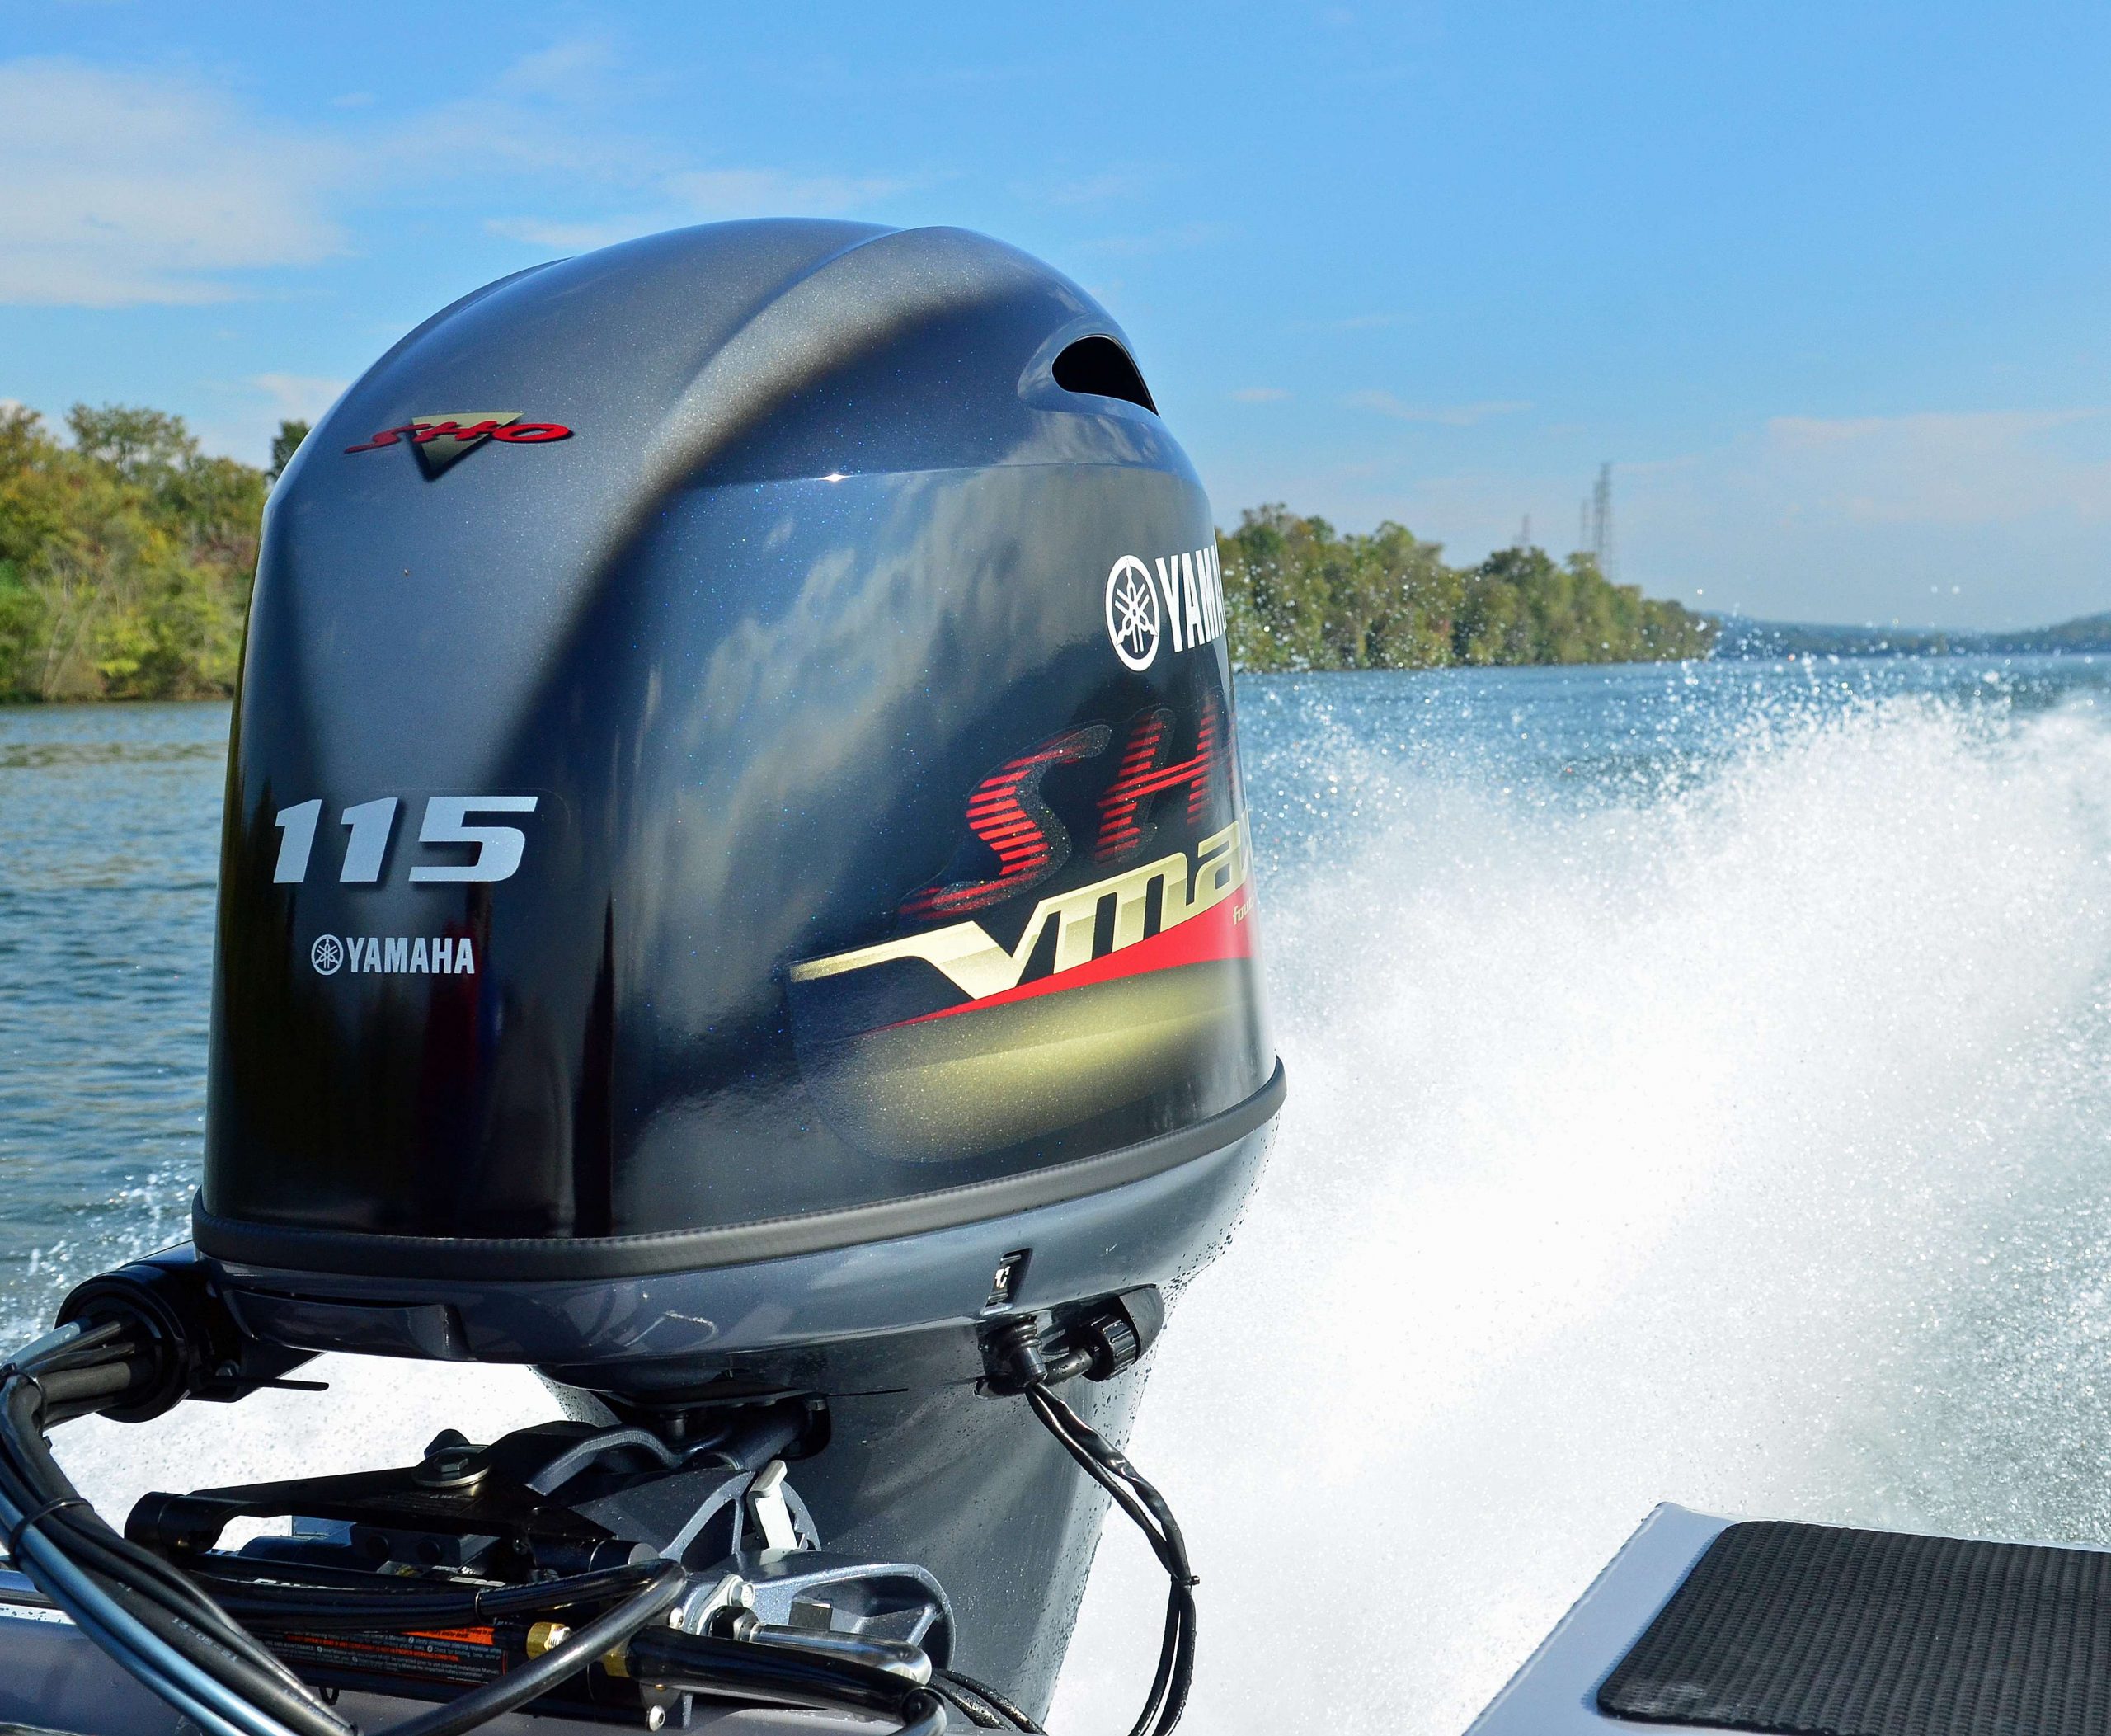 Need to retire a sad, old 2-stroke? Looking for a little more pep from your aluminum boat? Give Yamaha's new 115-horsepower VMAX SHO a look. It's got crazy torque and fuel efficiency thanks to its 4-stroke configuration and is likely lighter than your current outboard.